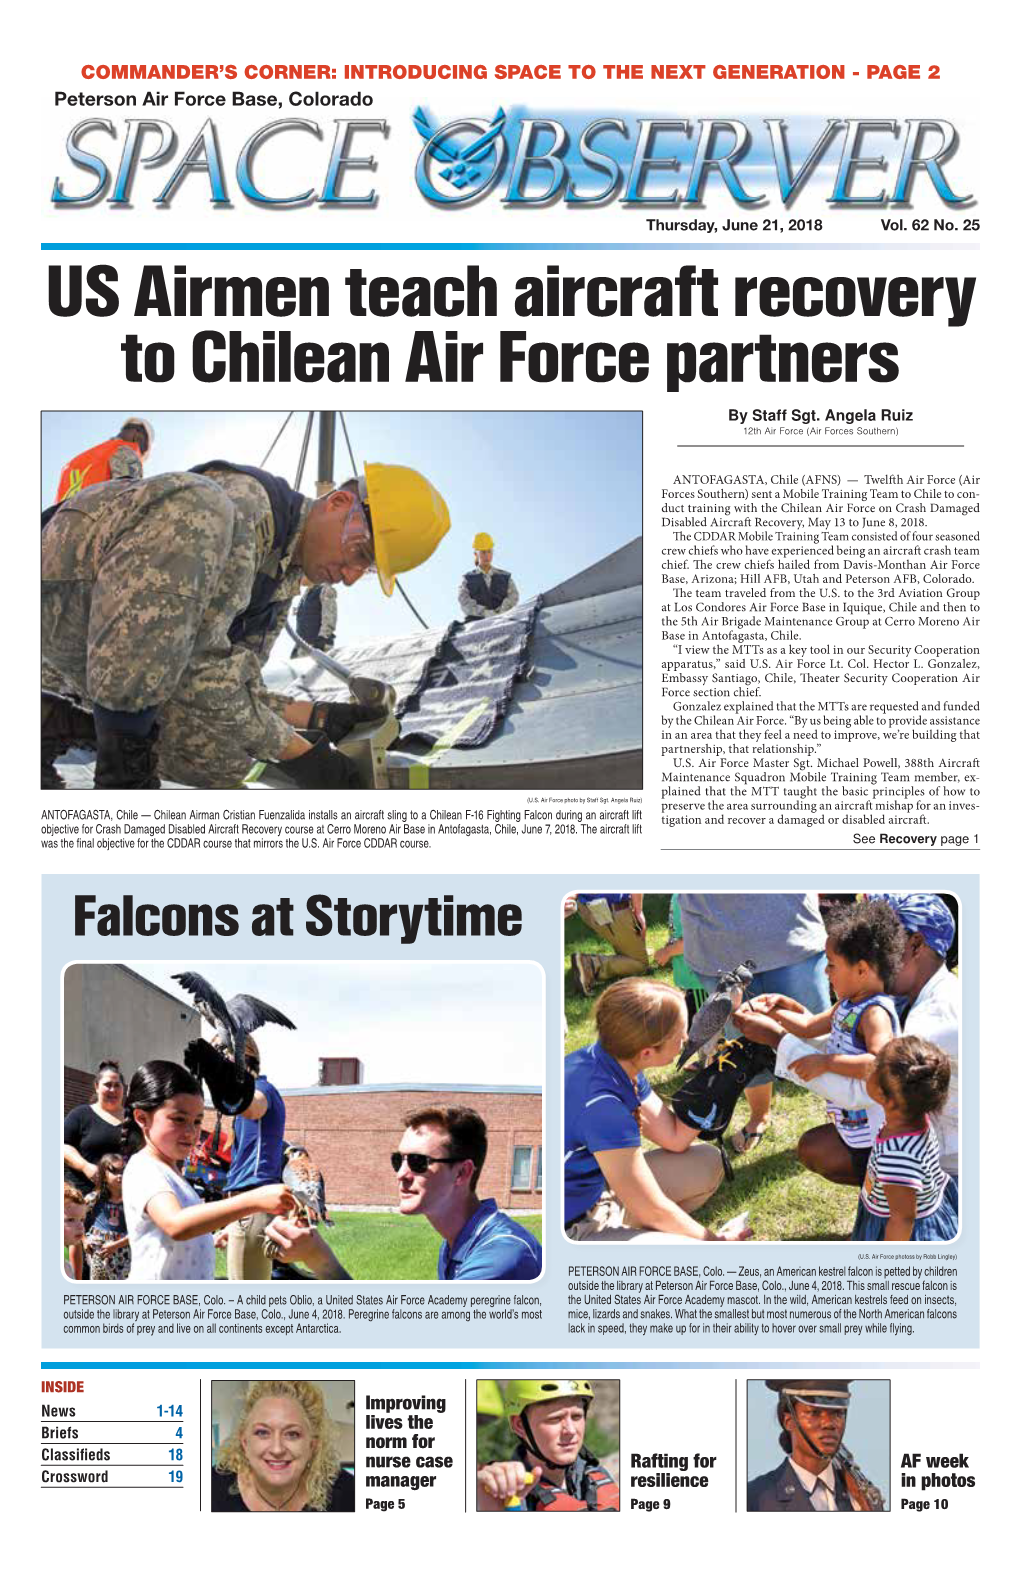 US Airmen Teach Aircraft Recovery to Chilean Air Force Partners by Staff Sgt